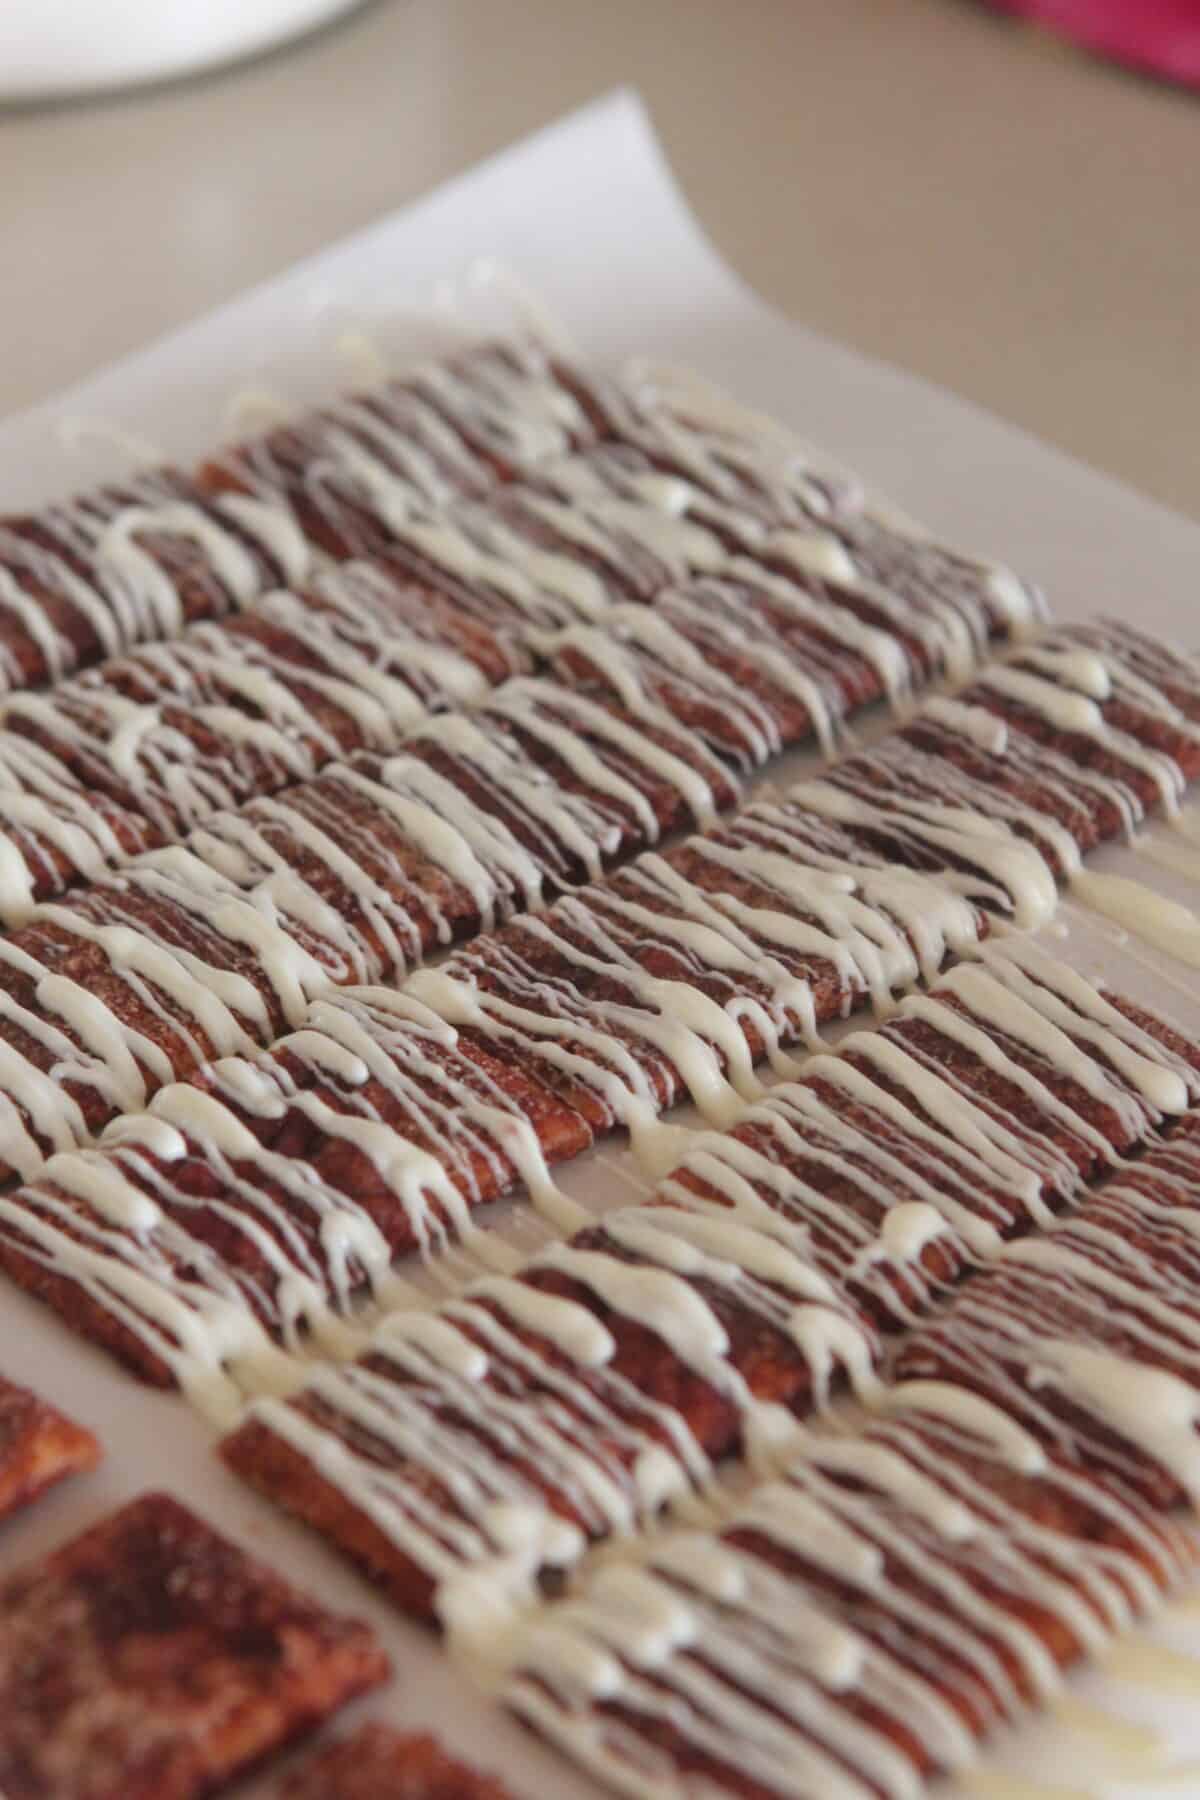 white chocolate drizzled over crack crackers